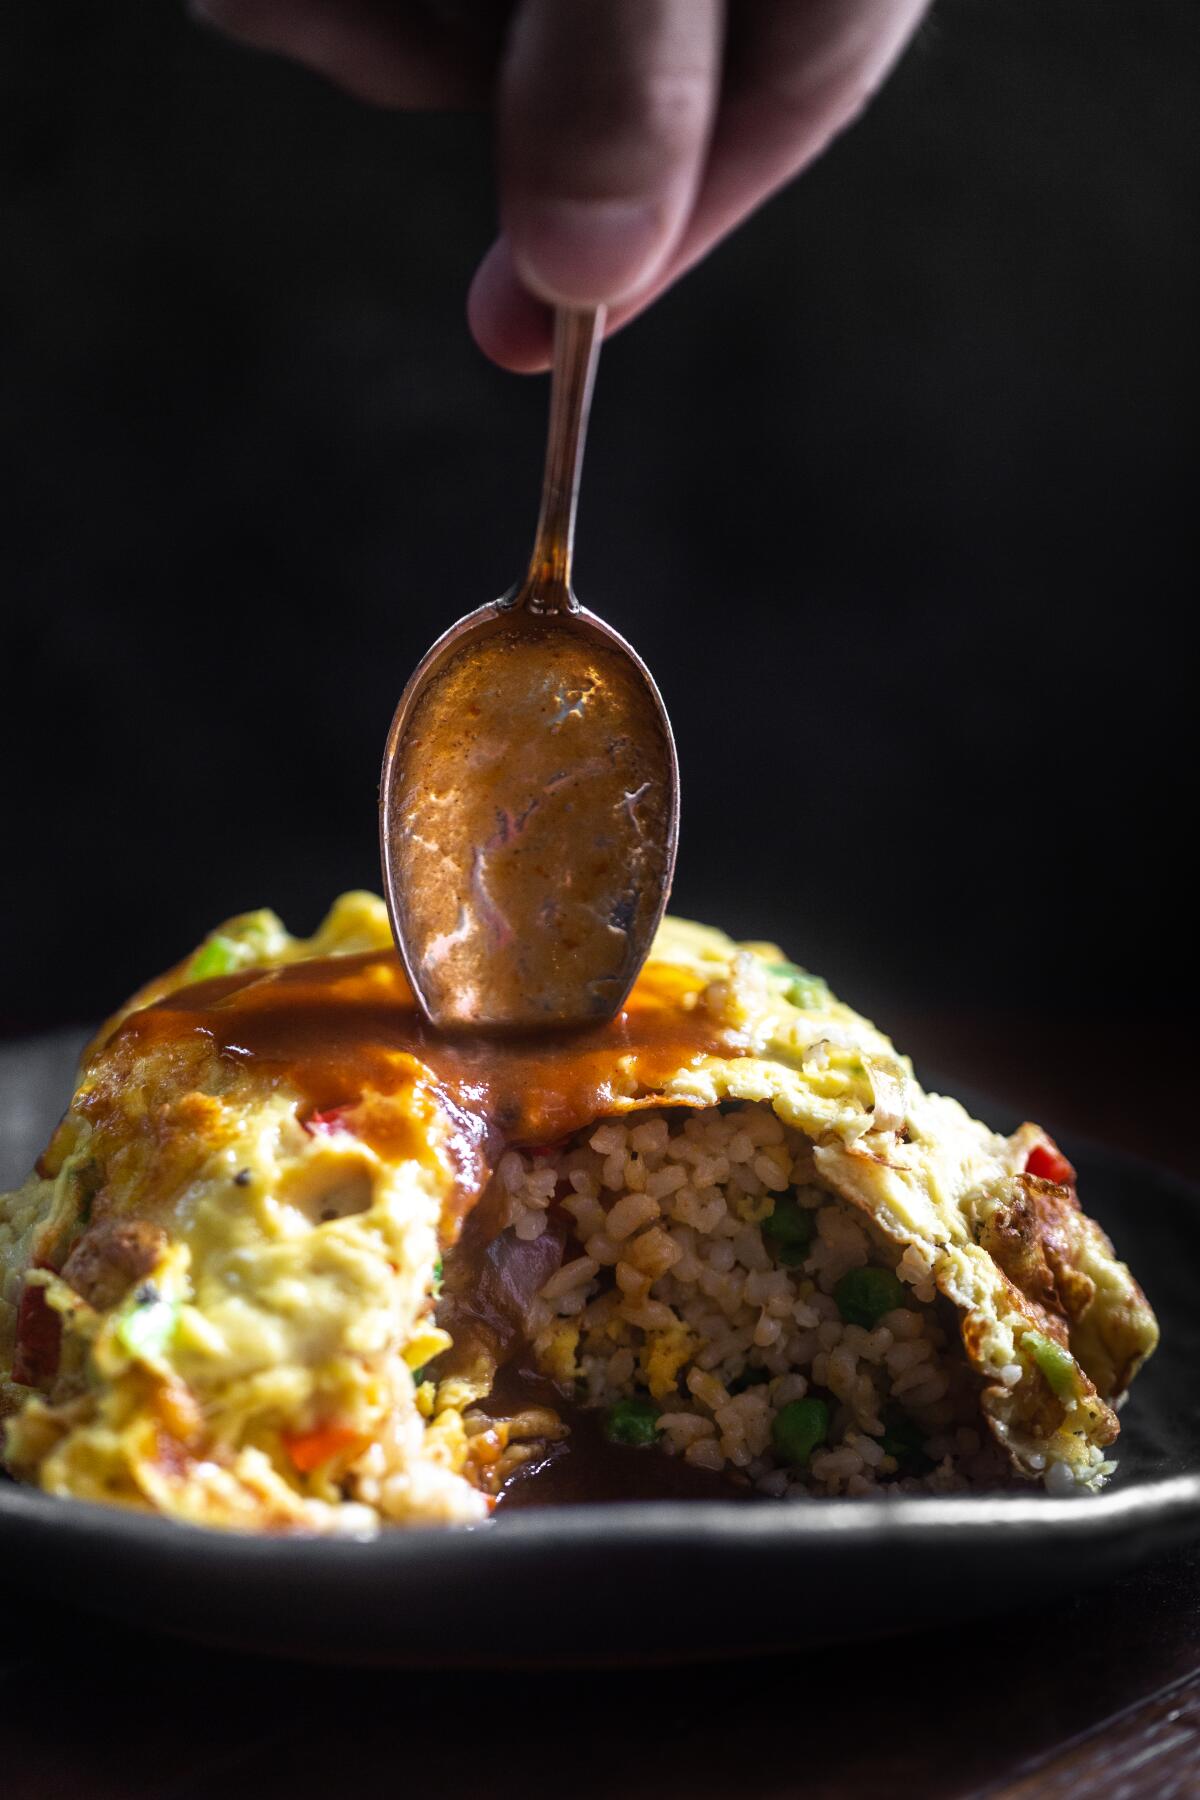 A spoon is poised to dig into a heap of omurice, or omelet rice.